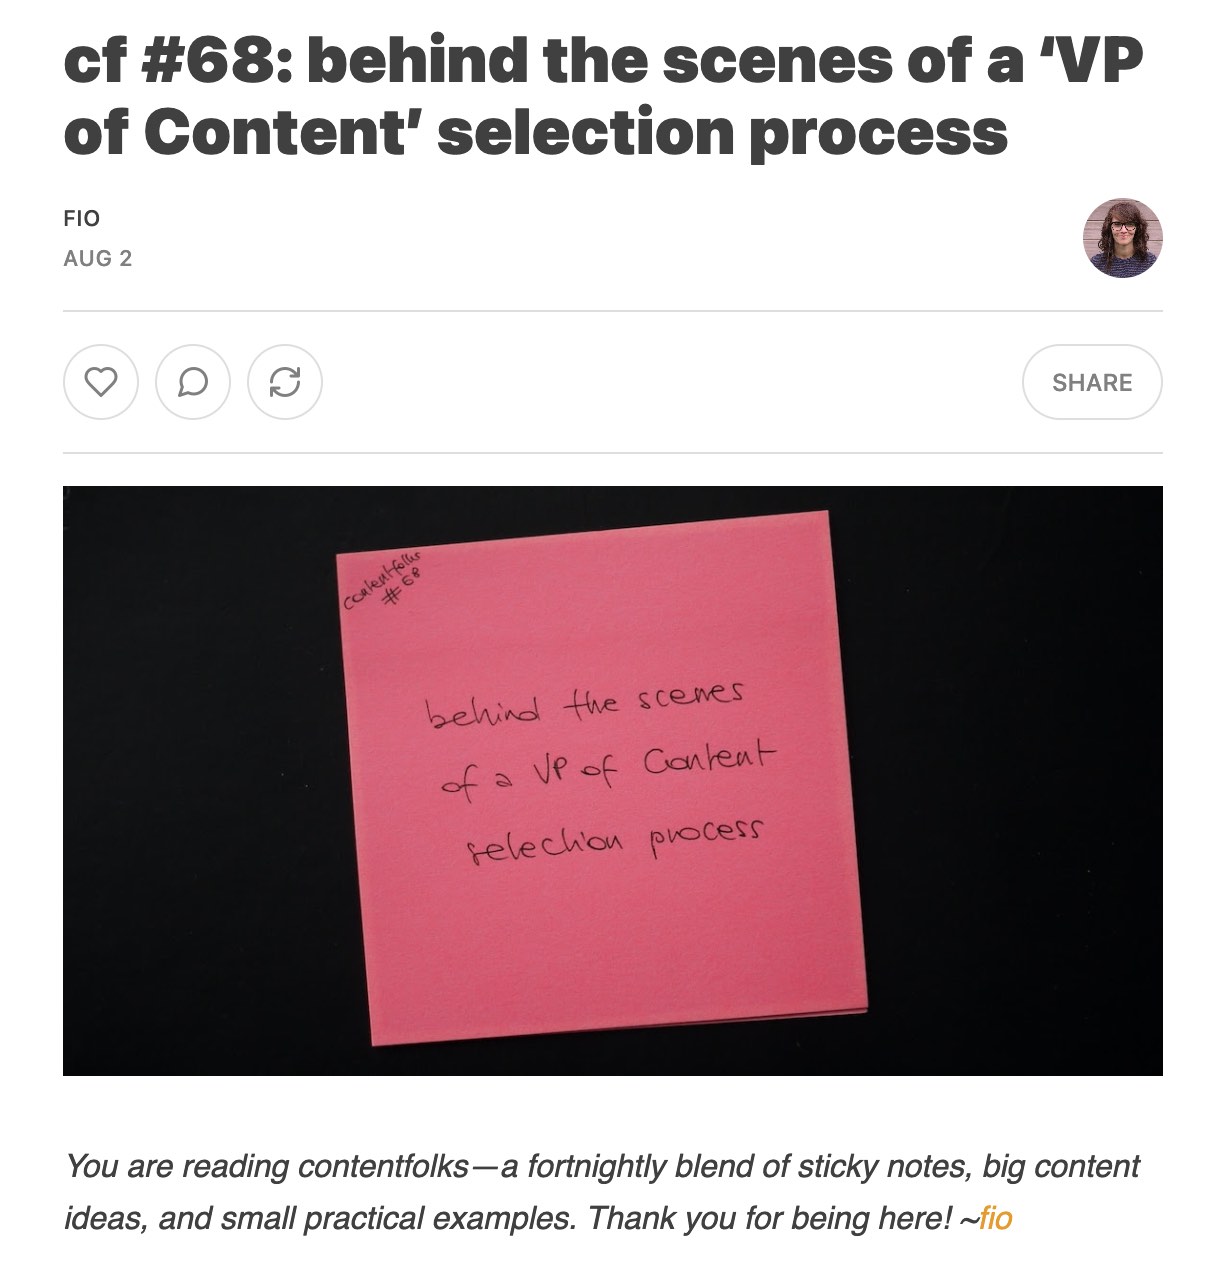 A newsletter titled: "cf #68: behind the scenes of a VP of Content selection process"